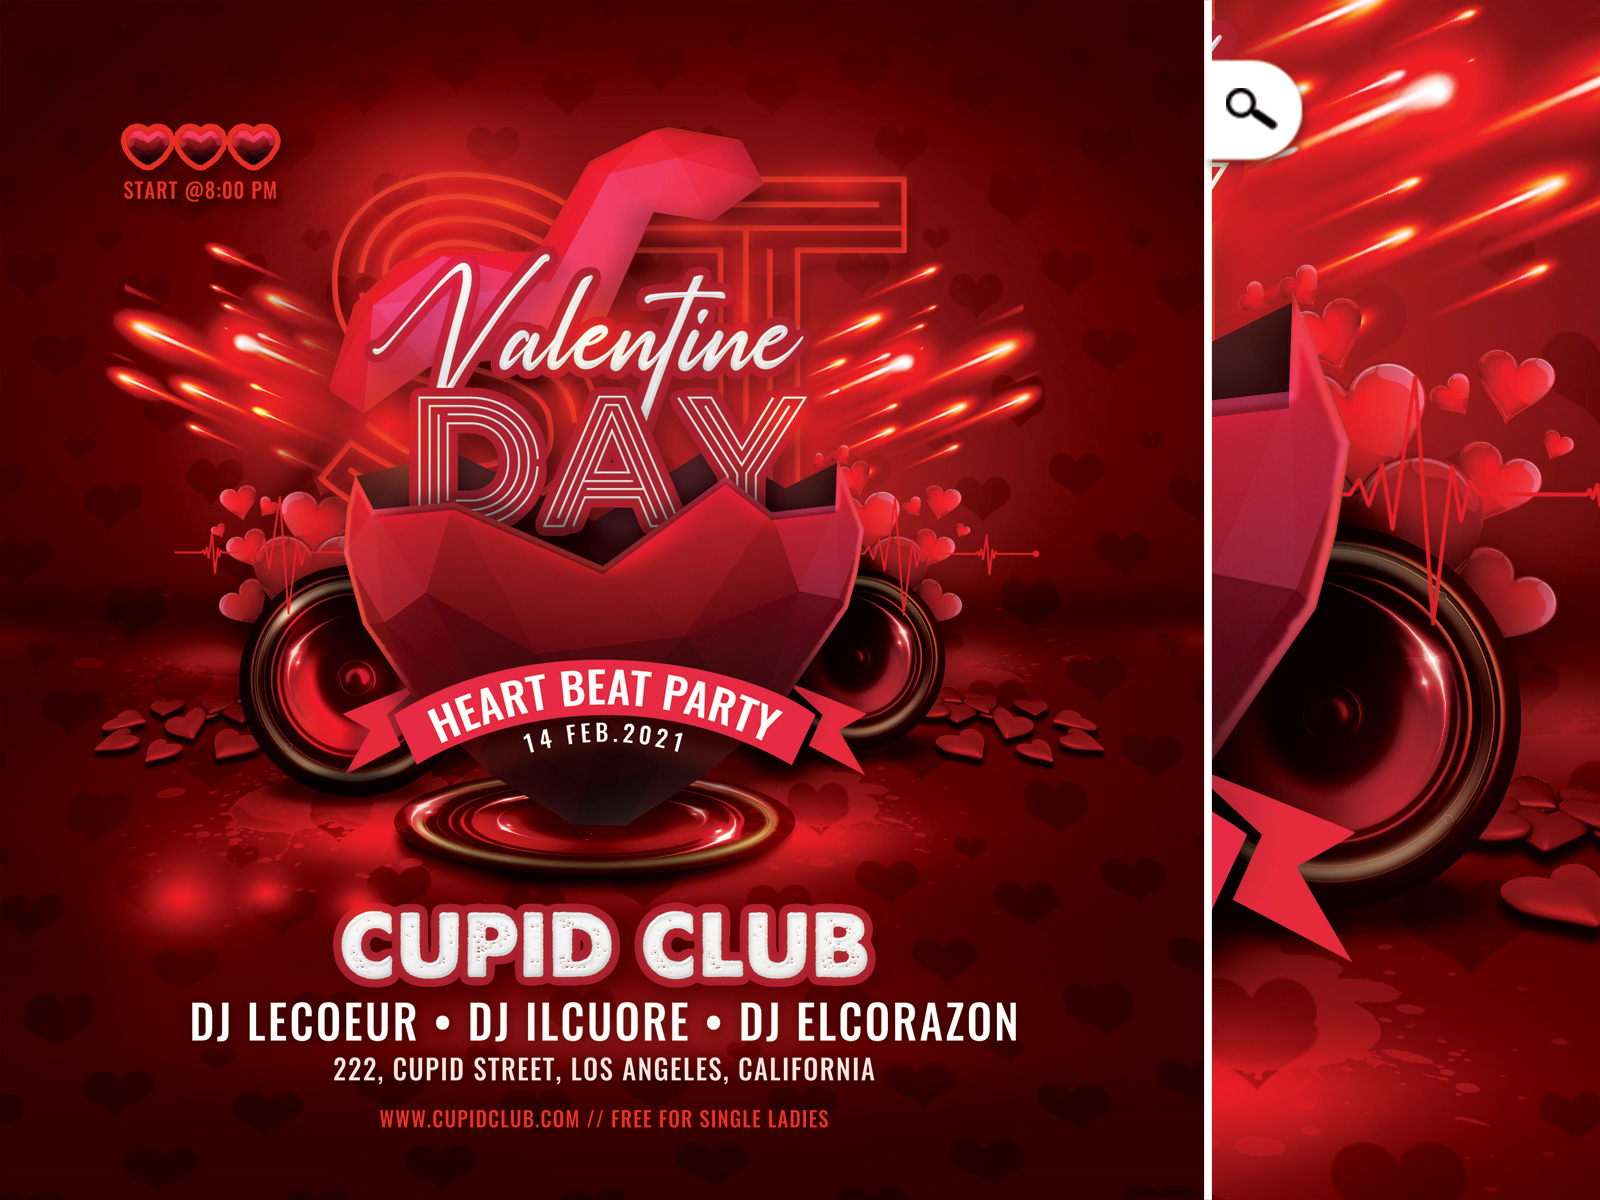 Valentine Day Club Party Flyer by n2n44 on Dribbble